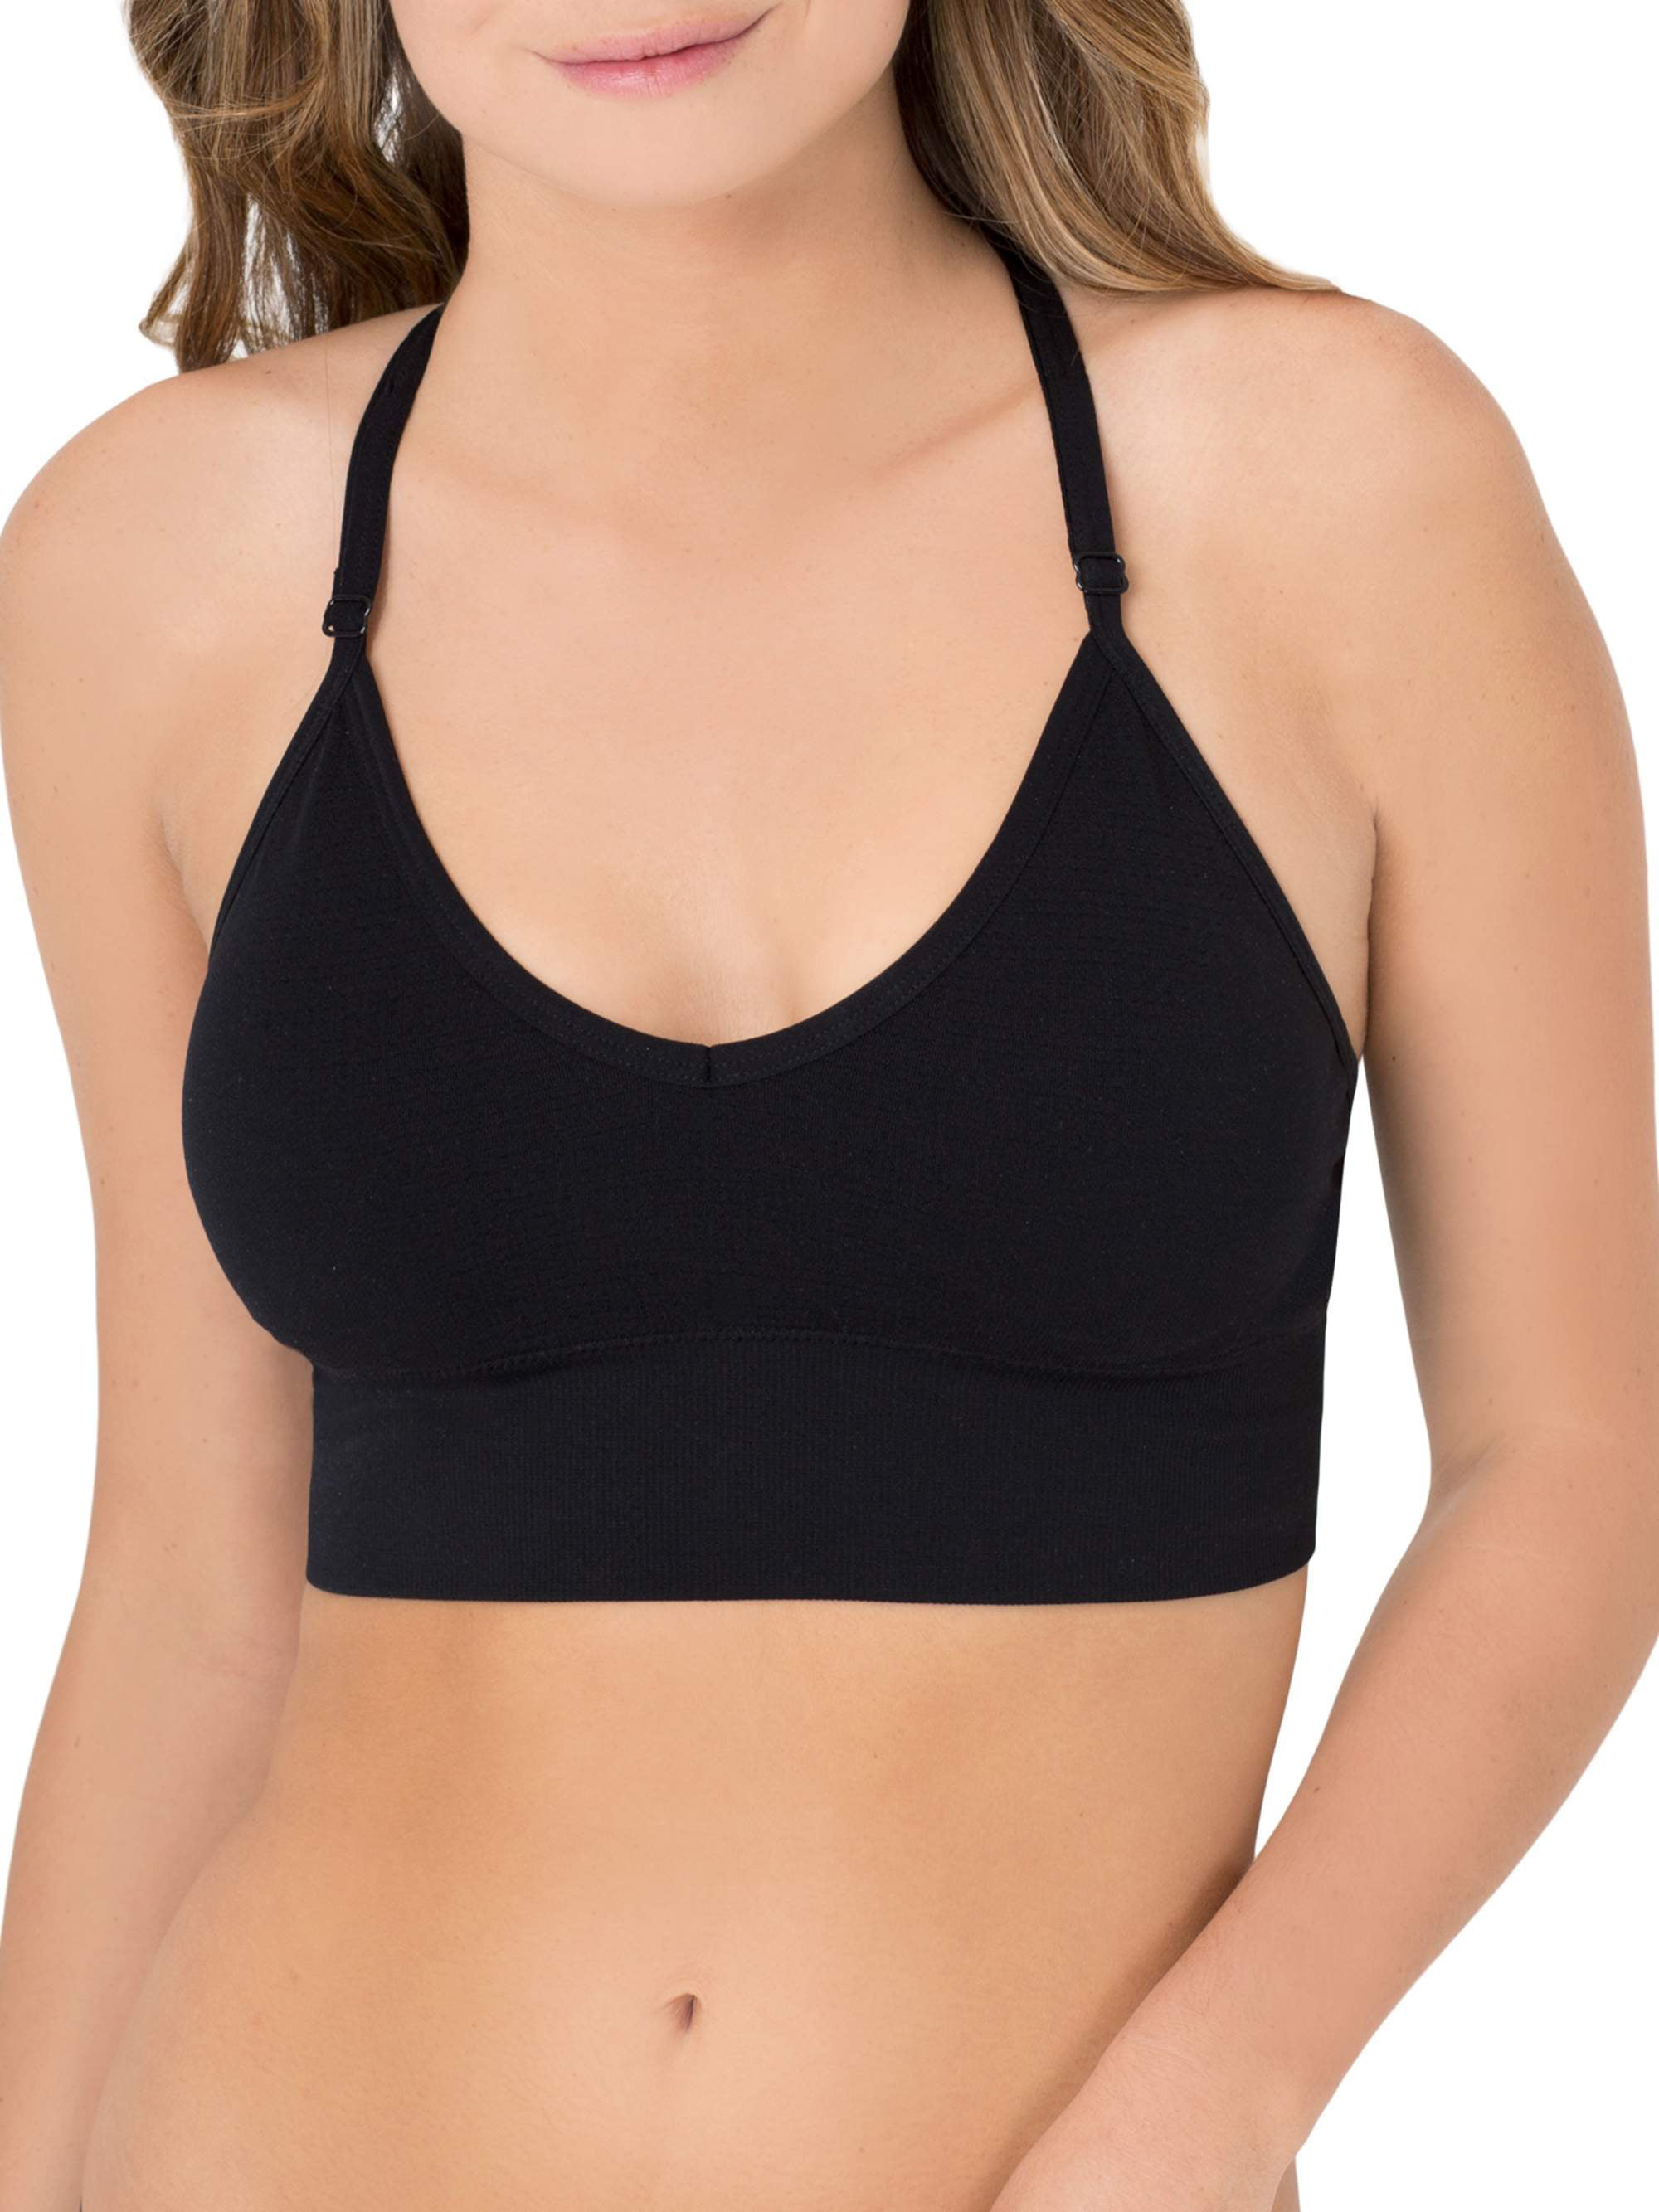 A Fresh Collection Junior's Fishnet Racerback Sports Bra, Style FT624 